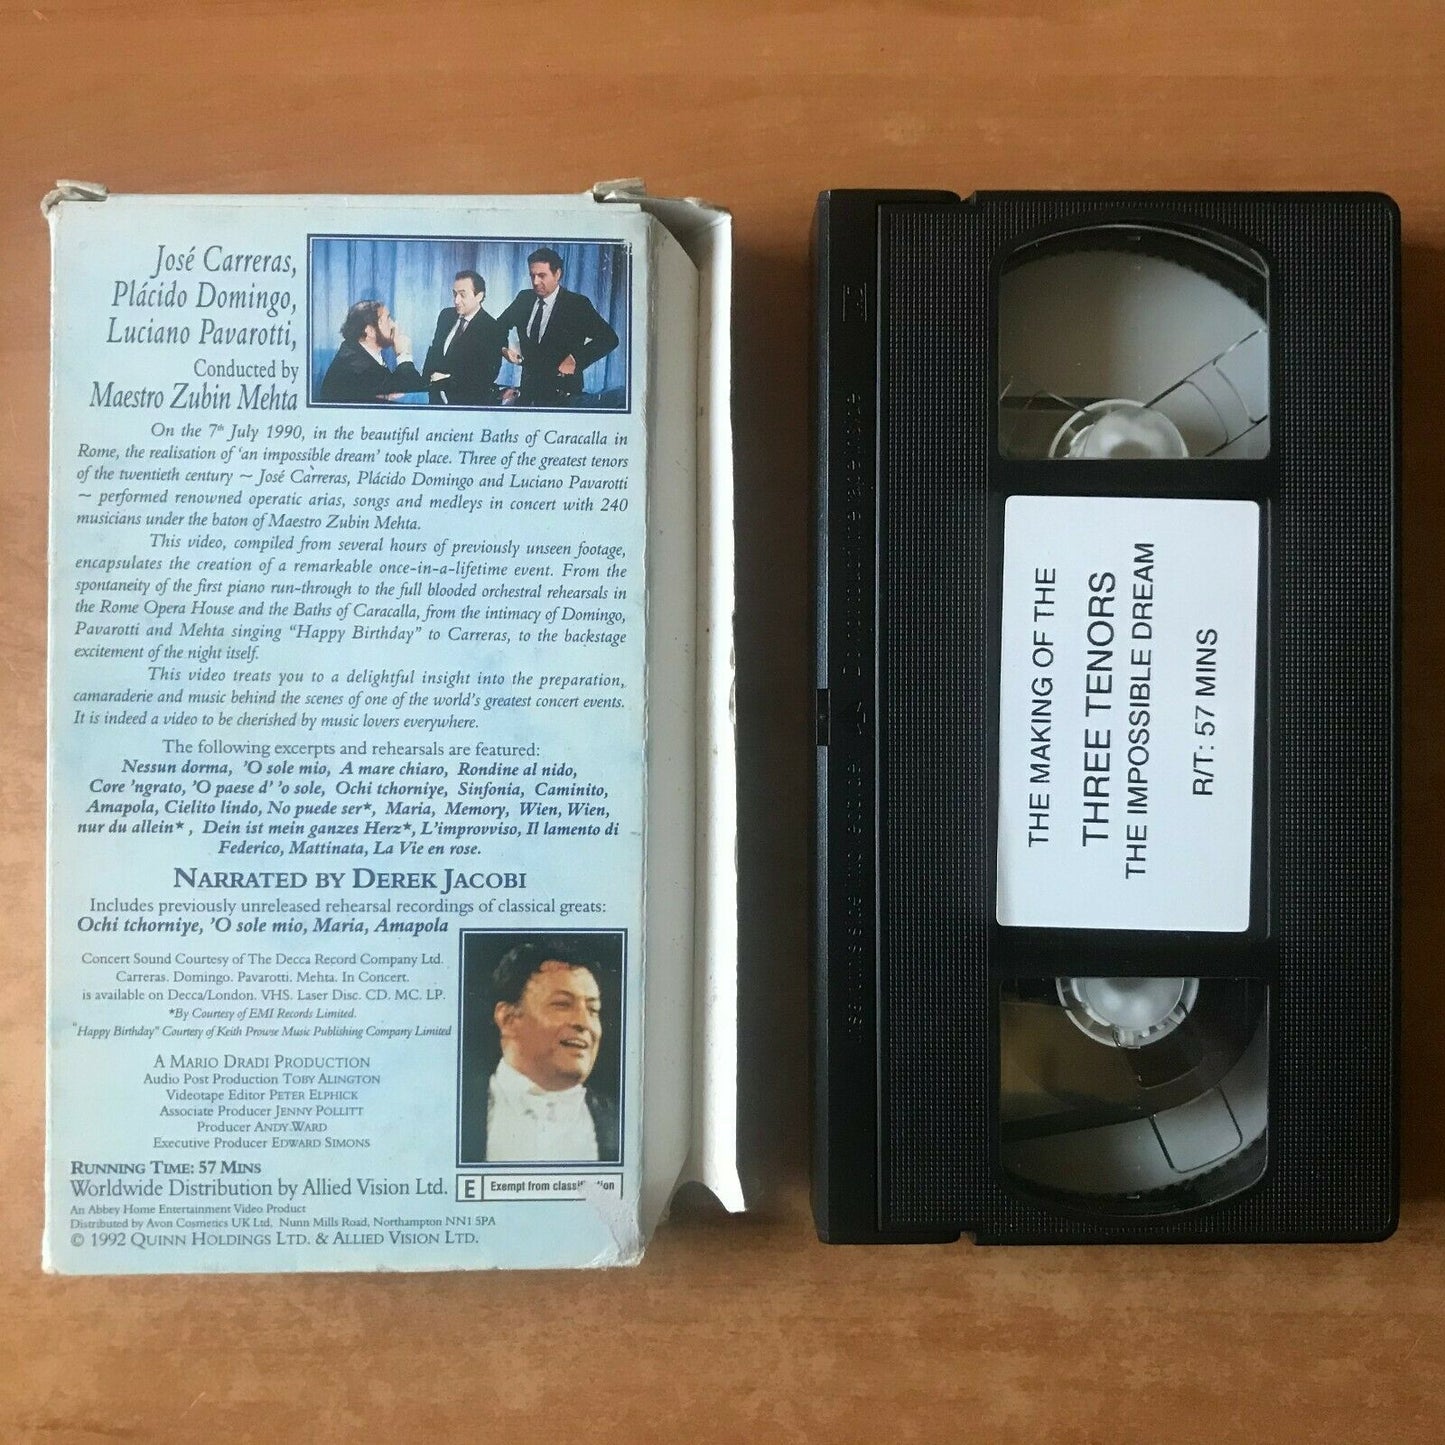 Three Tenors: The Impossible Dream [Making Of]; (Carton) Luciano Pavarotti - VHS-